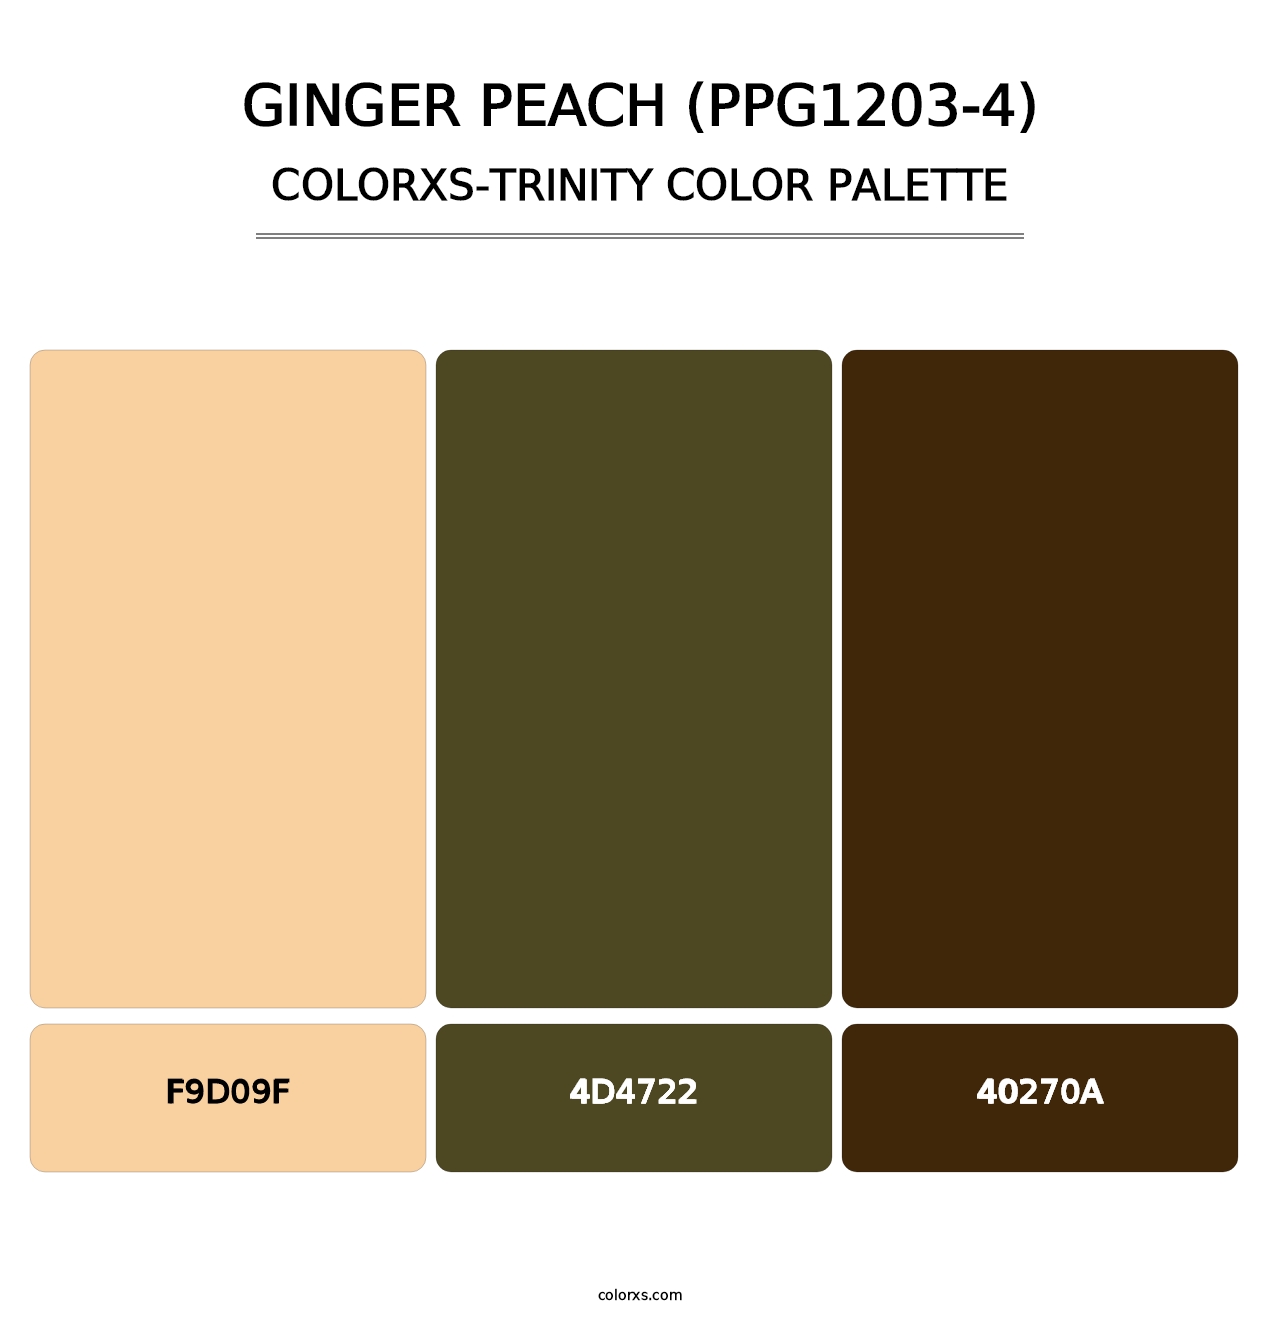 Ginger Peach (PPG1203-4) - Colorxs Trinity Palette